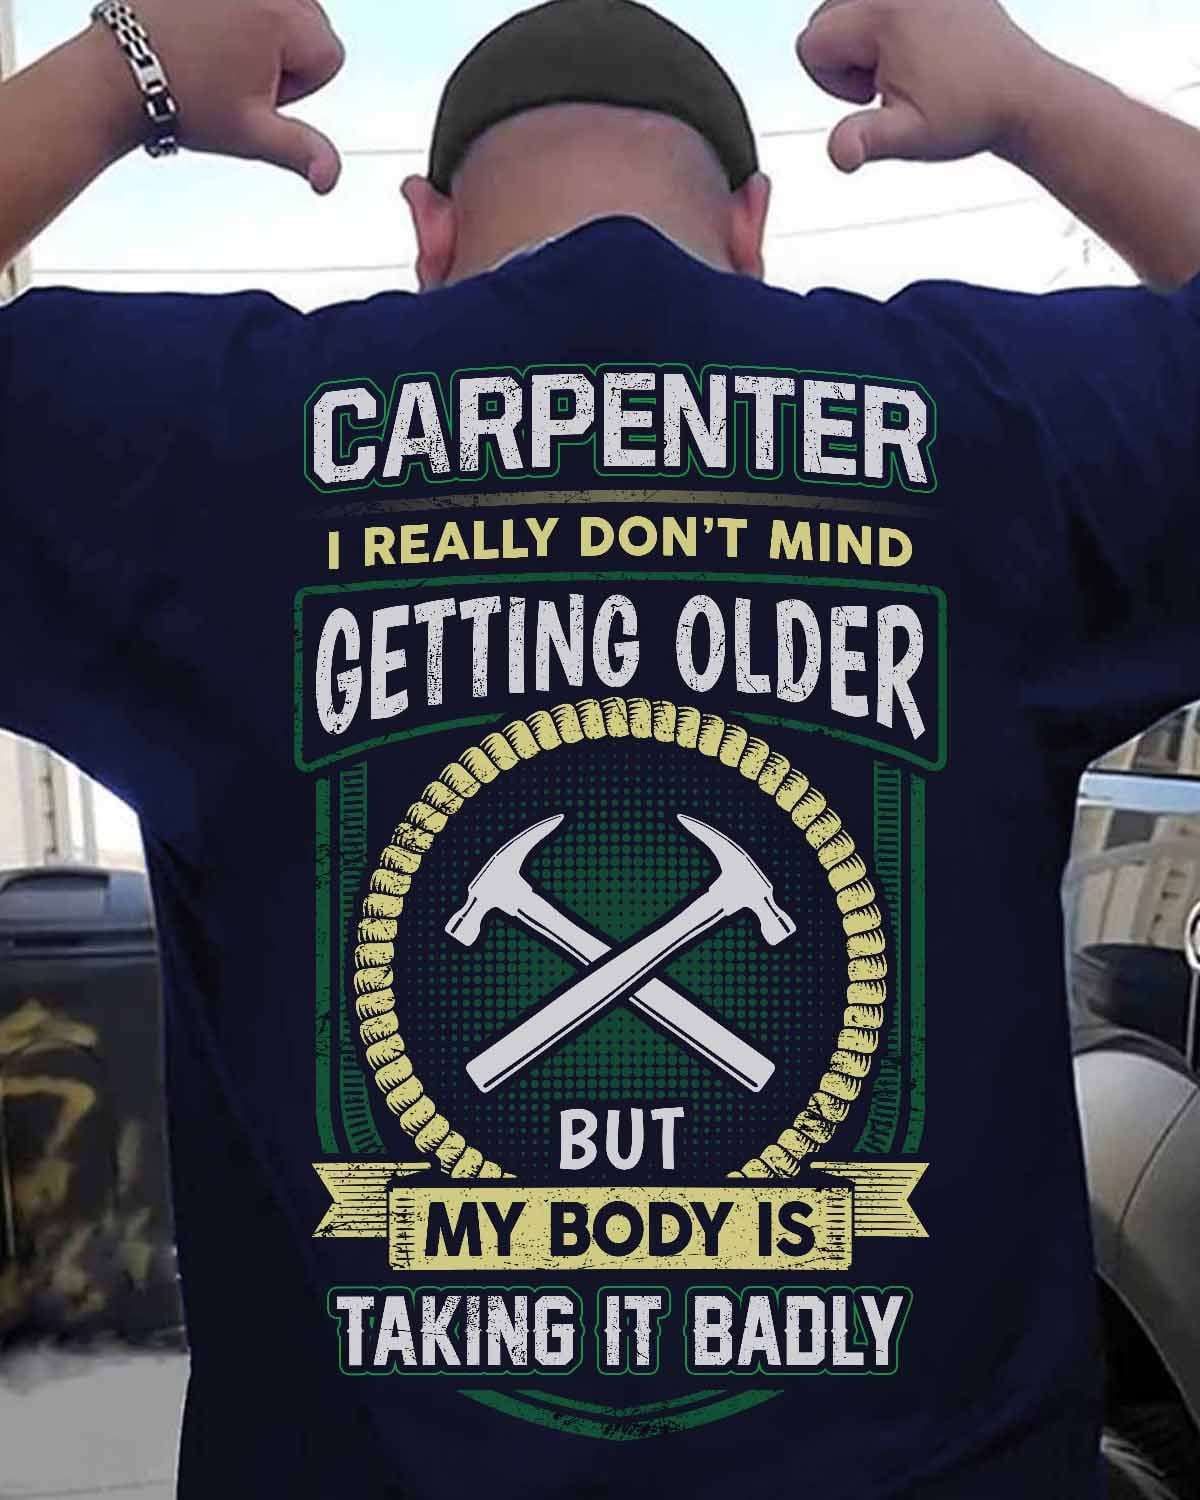 Carpenter i really don't mind getting older but my body taking it badly